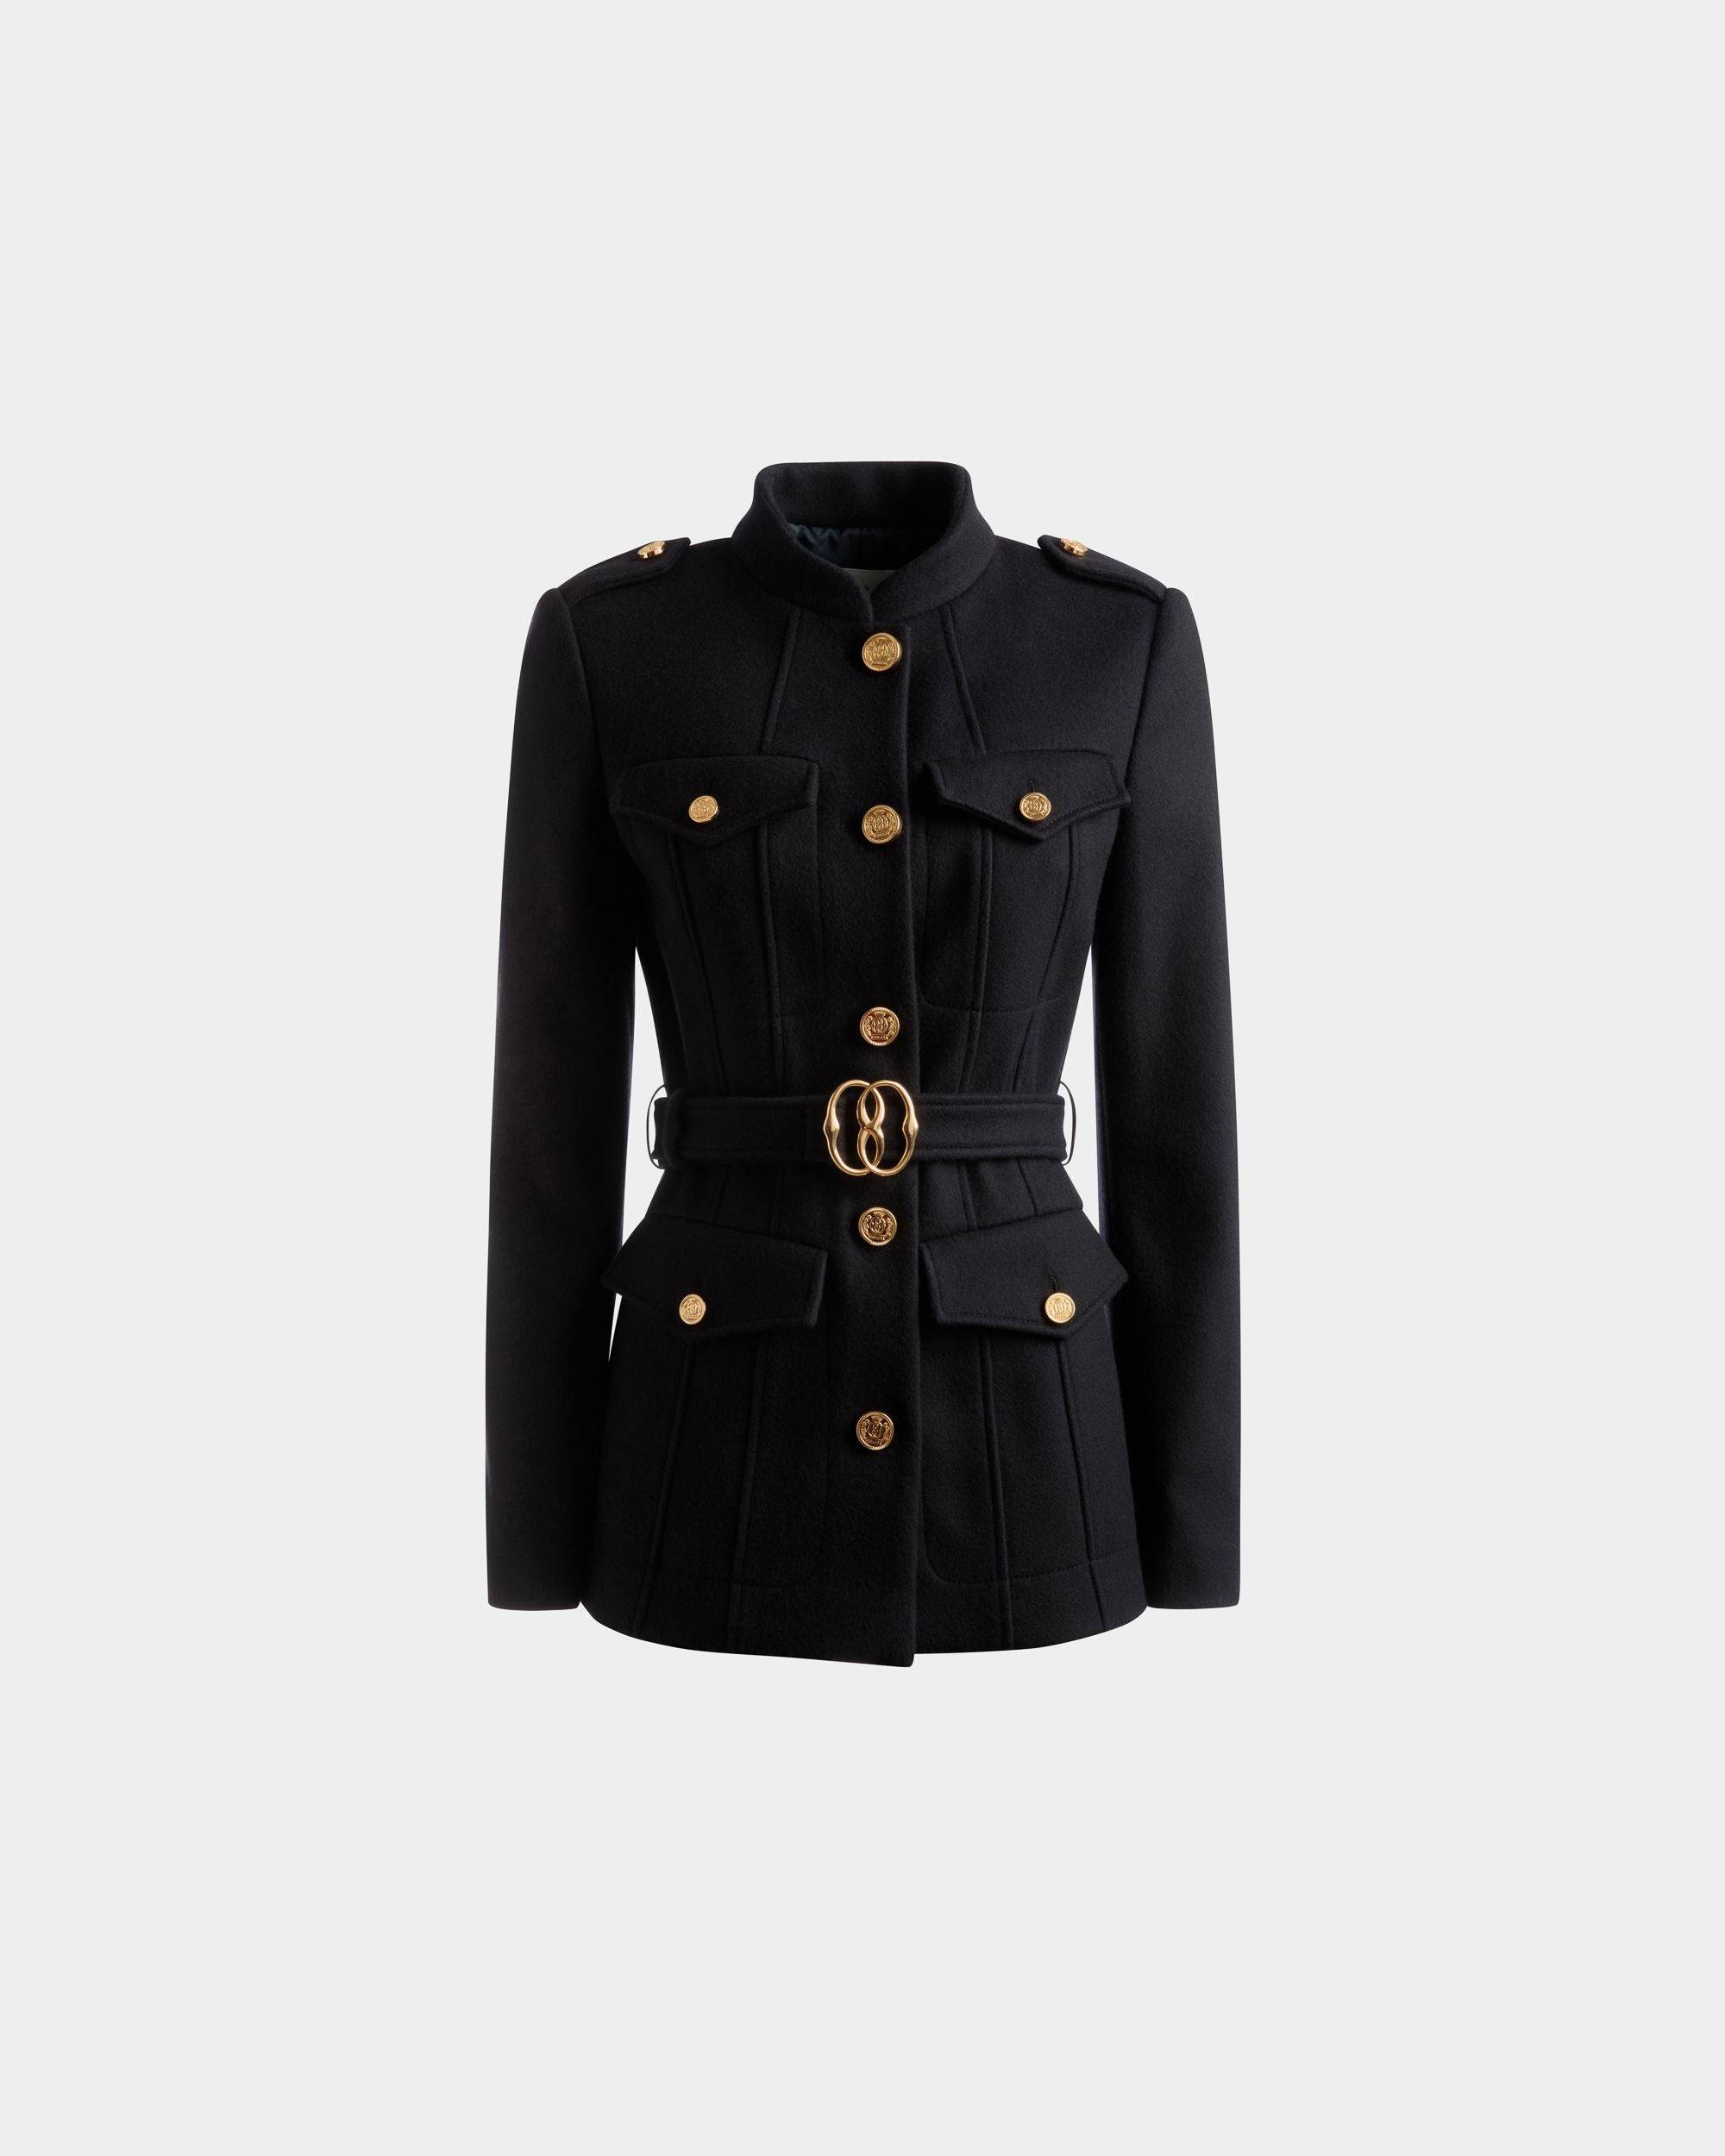 Women's Belted Jacket In Navy Wool | Bally | Still Life Front